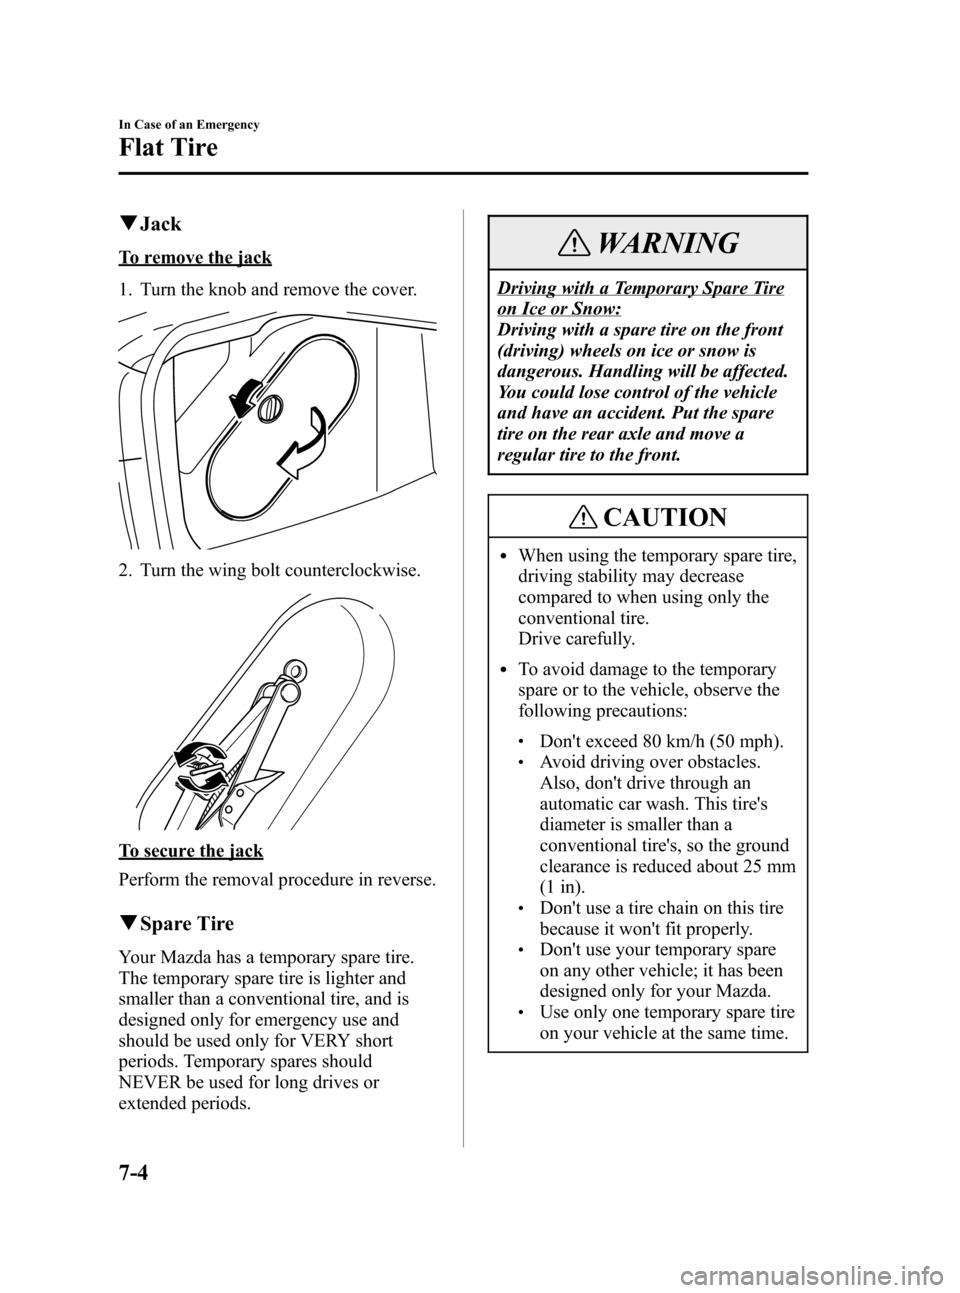 MAZDA MODEL 3 HATCHBACK 2006  Owners Manual (in English) Black plate (230,1)
qJack
To remove the jack
1. Turn the knob and remove the cover.
2. Turn the wing bolt counterclockwise.
To secure the jack
Perform the removal procedure in reverse.
qSpare Tire
You